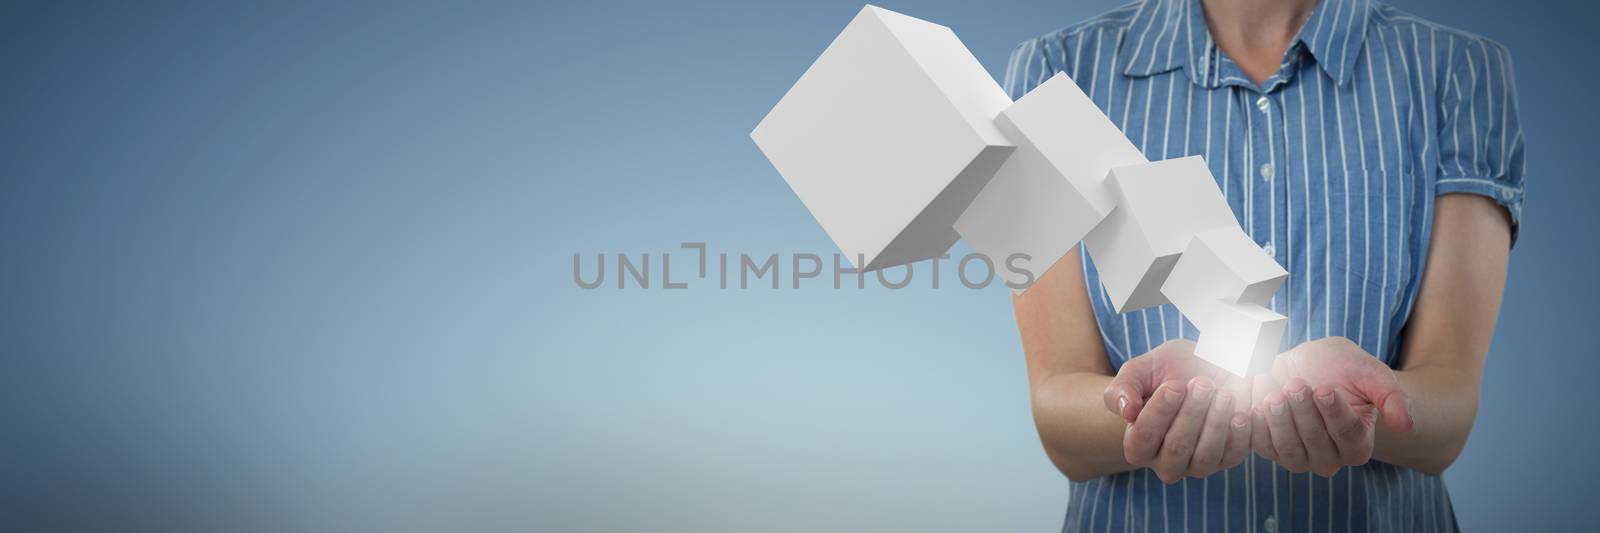 Businesswoman presenting object against abstract blue background